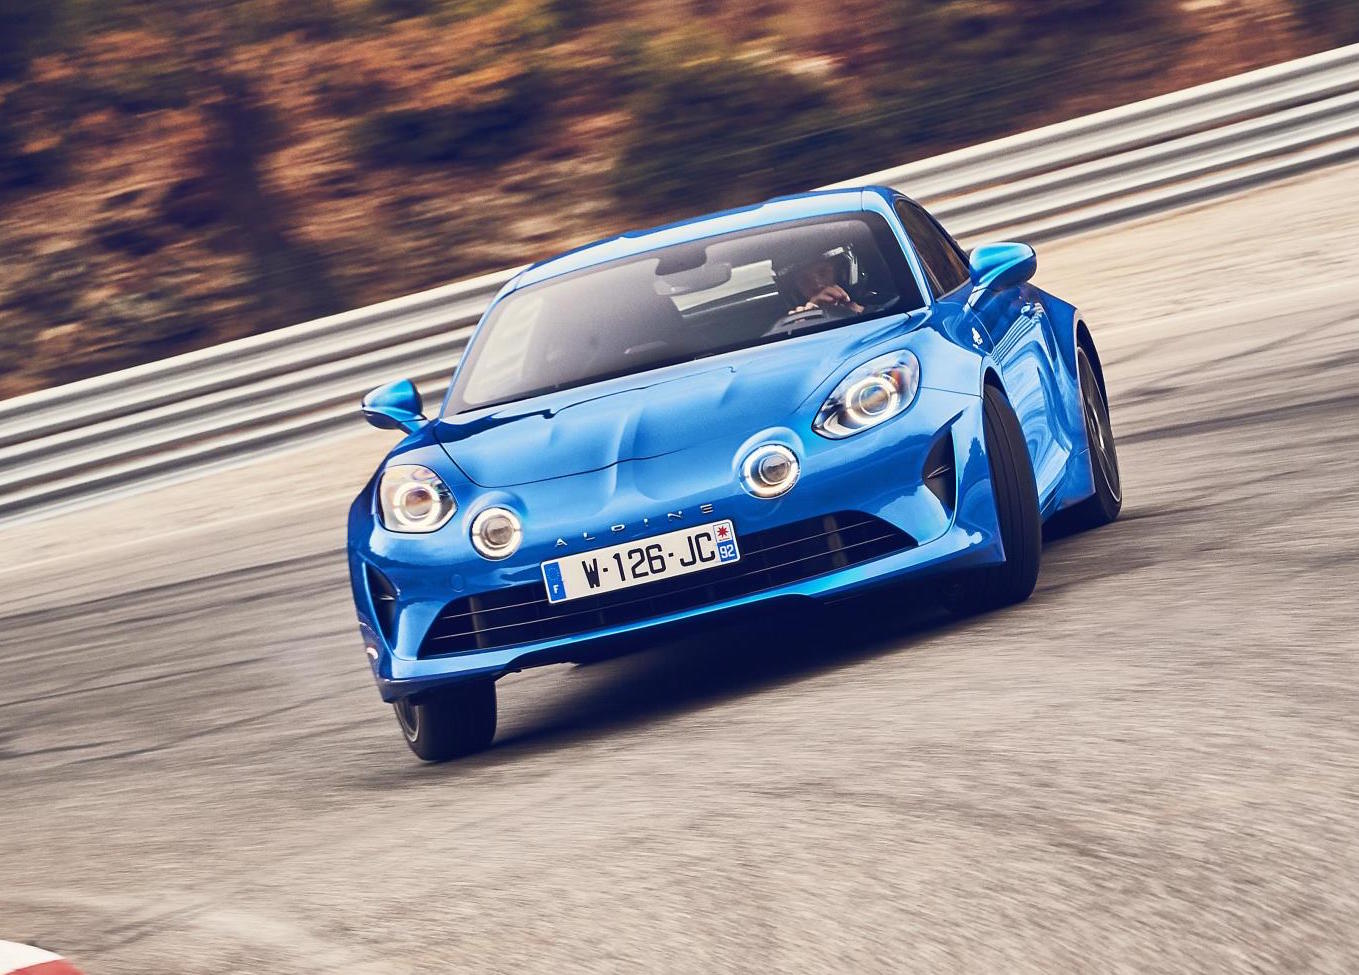 Alpine A110 ‘Sport’ in the works, more power & less weight – report